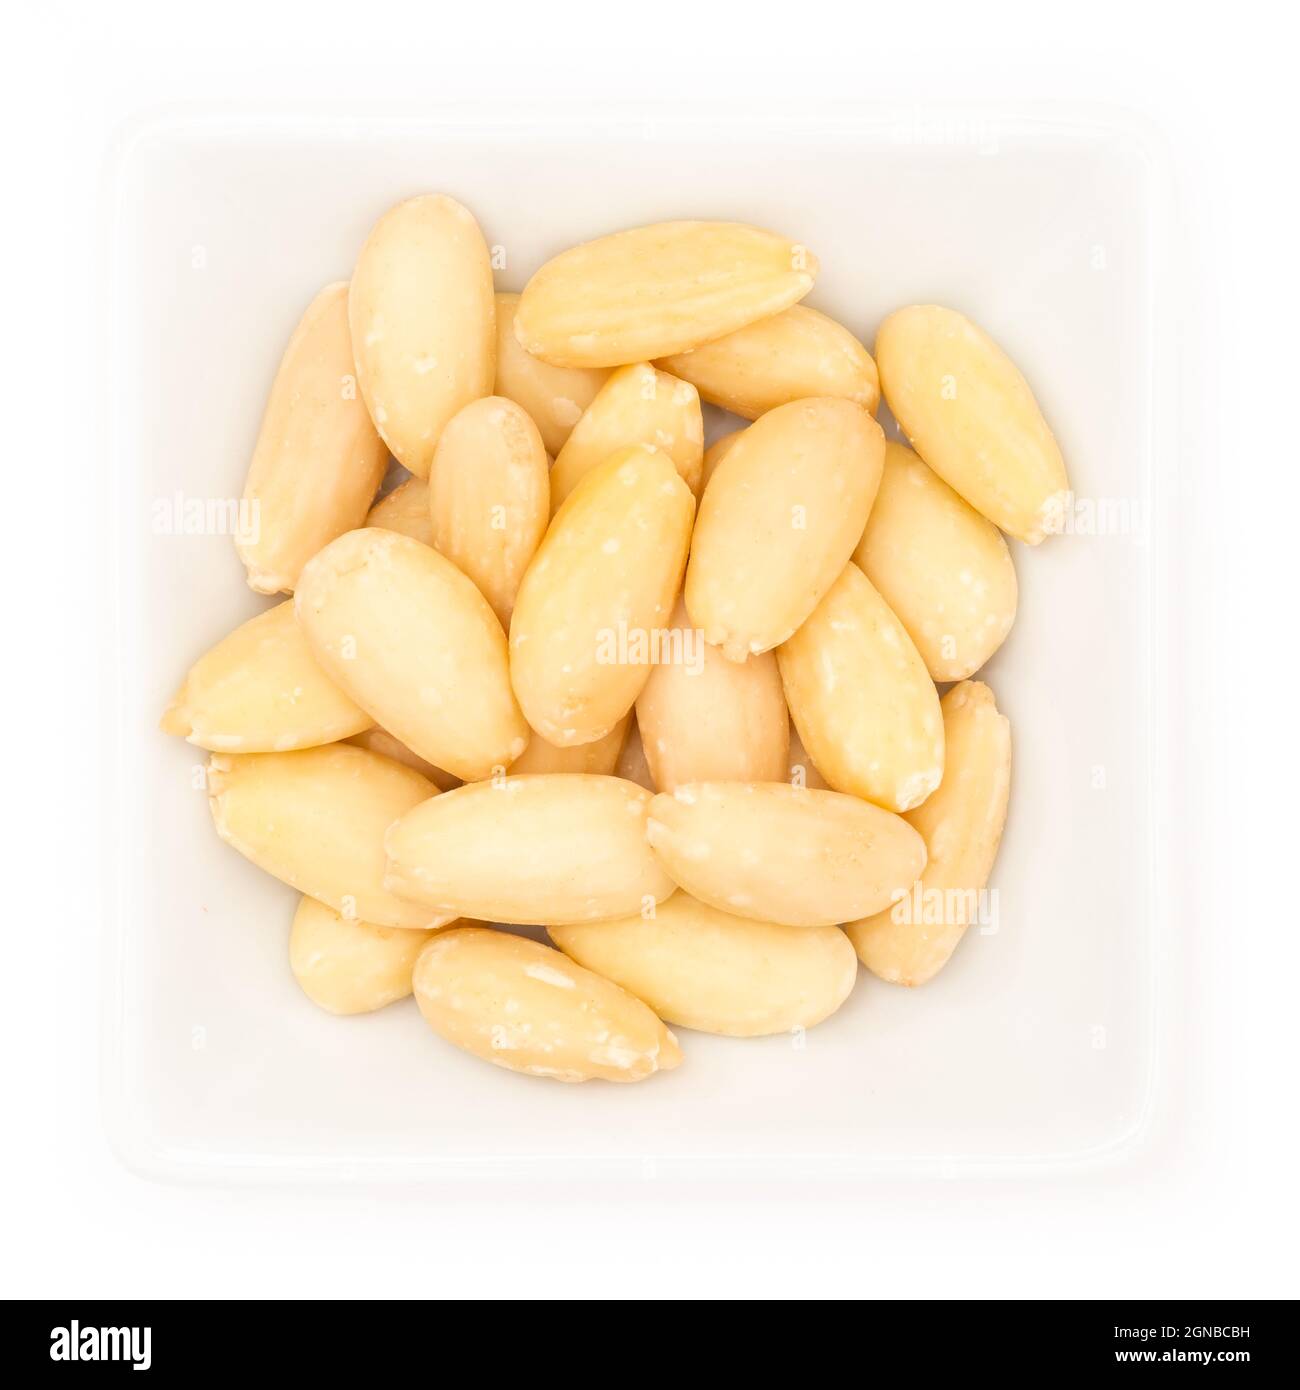 Closeup of peeled almonds in a white square bowl isolated on a white background Stock Photo